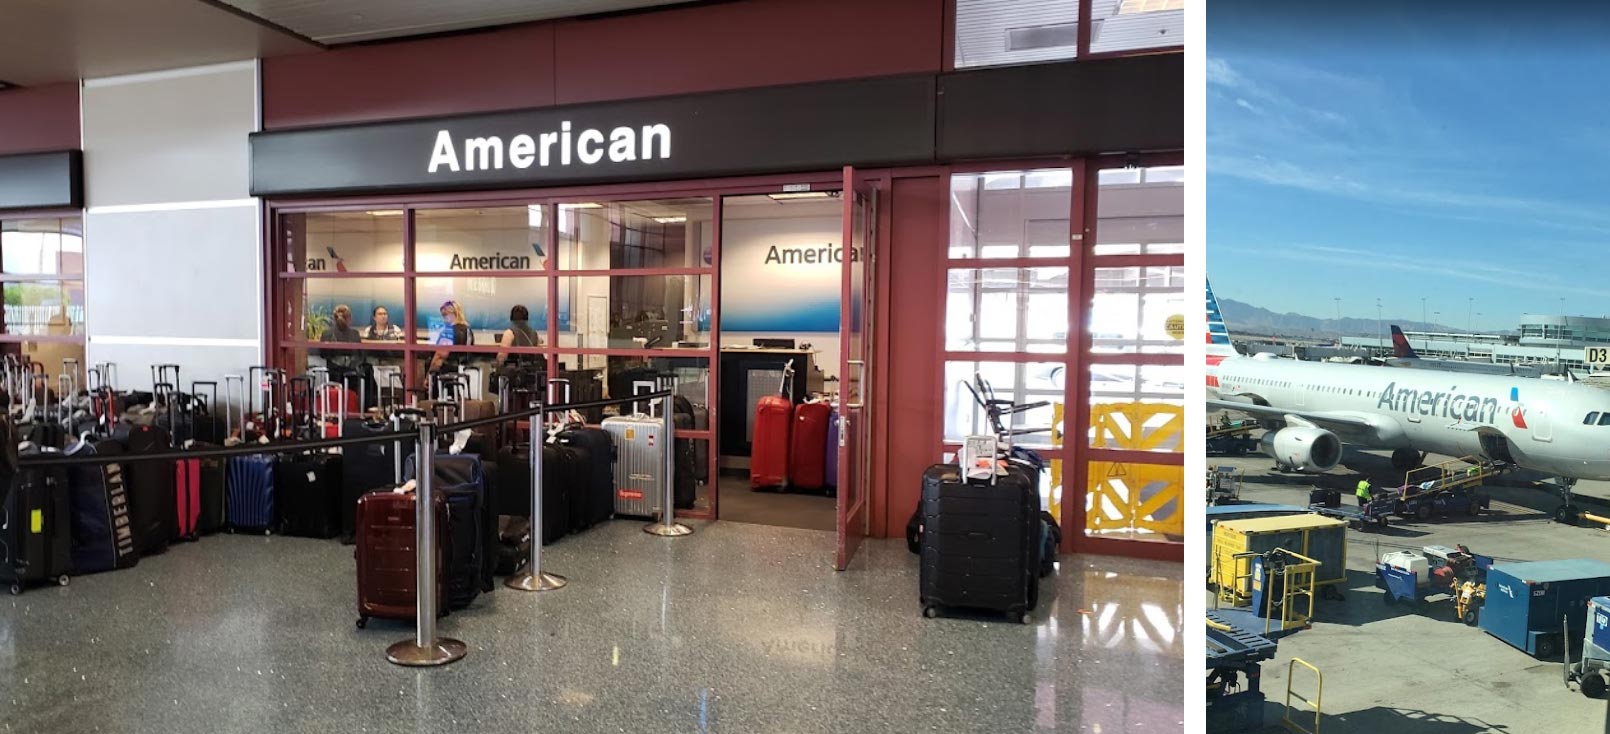 American Airline at McCarran Airport: check-in